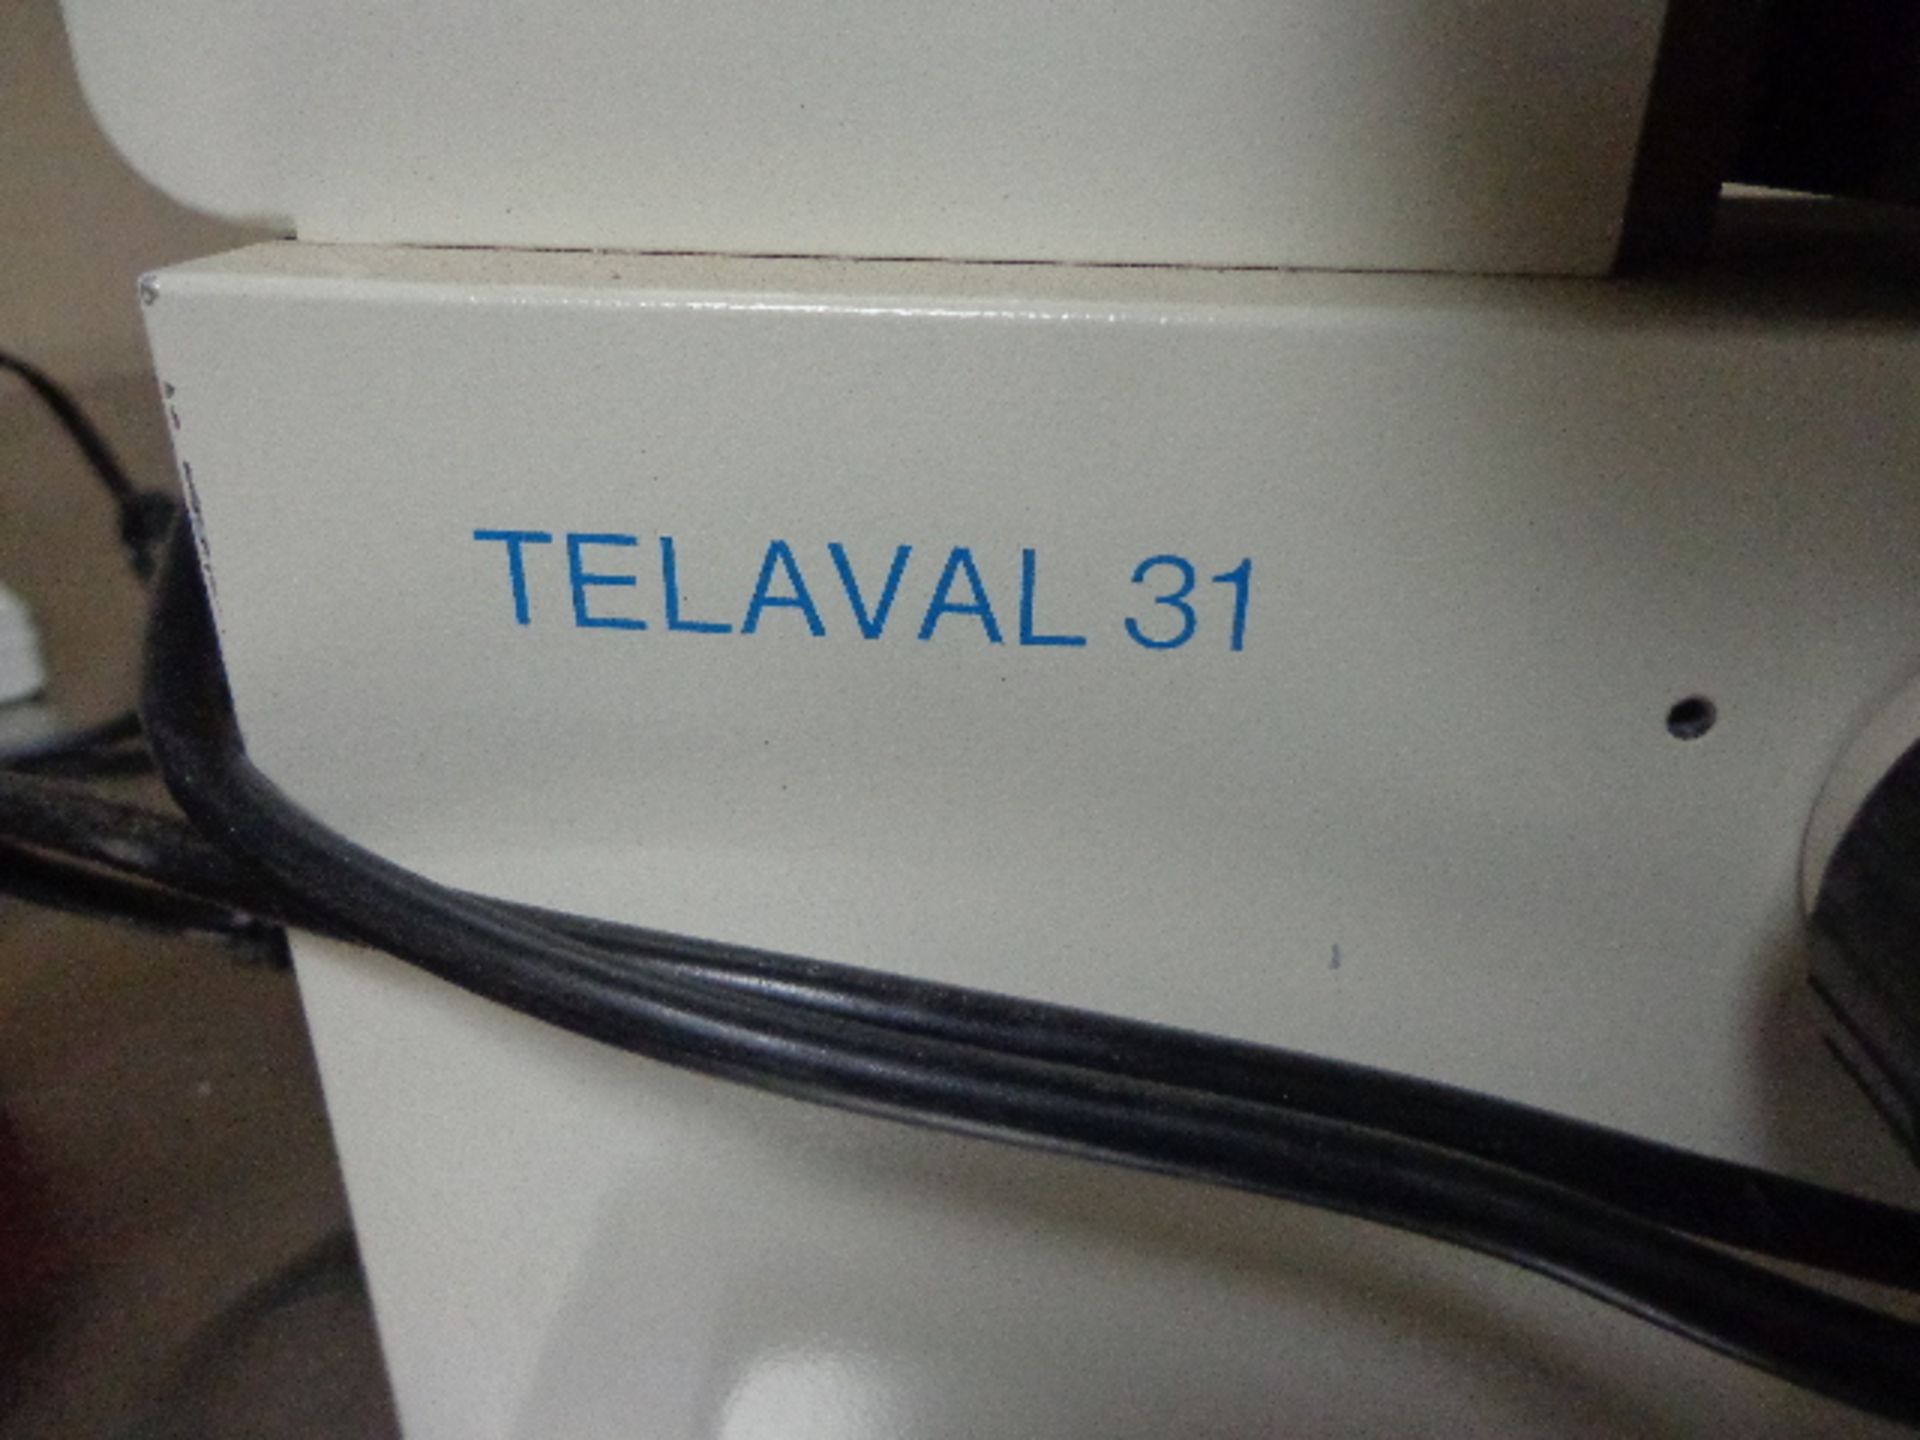 ZEISS TELAVAL 31 INVERTED PHASE CONTRAST MICROSCOPE 5501717 - Image 2 of 2